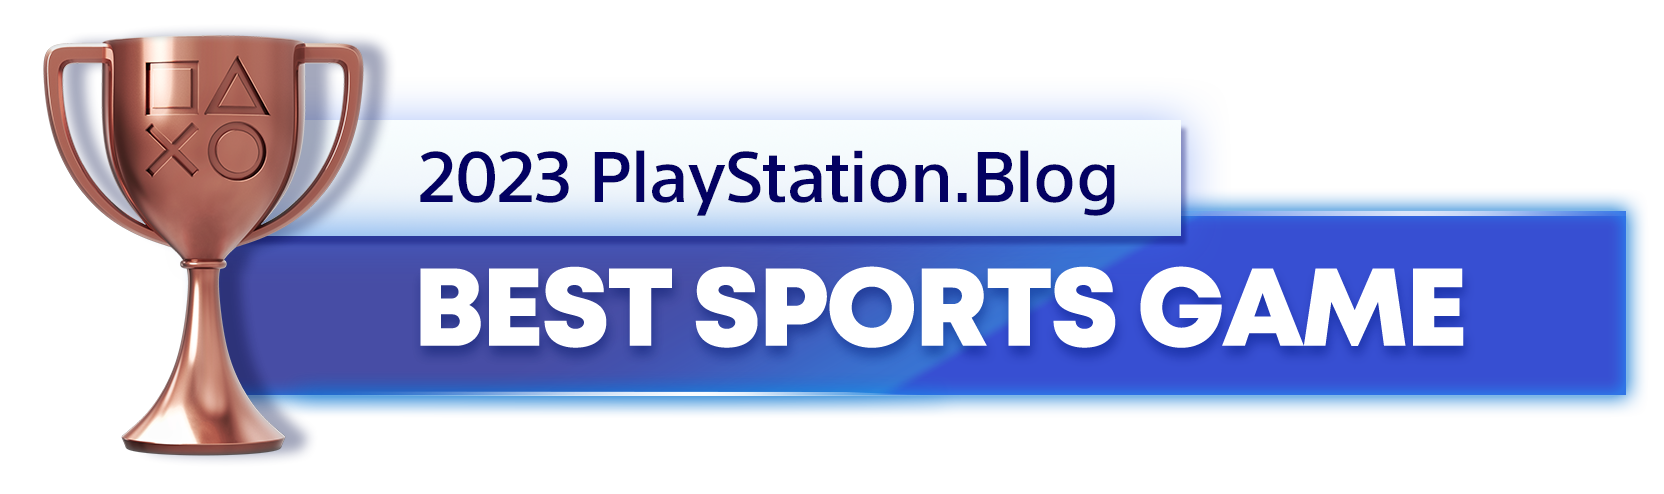  "Bronze Trophy for the 2023 PlayStation Blog Best Sports Game Winner"